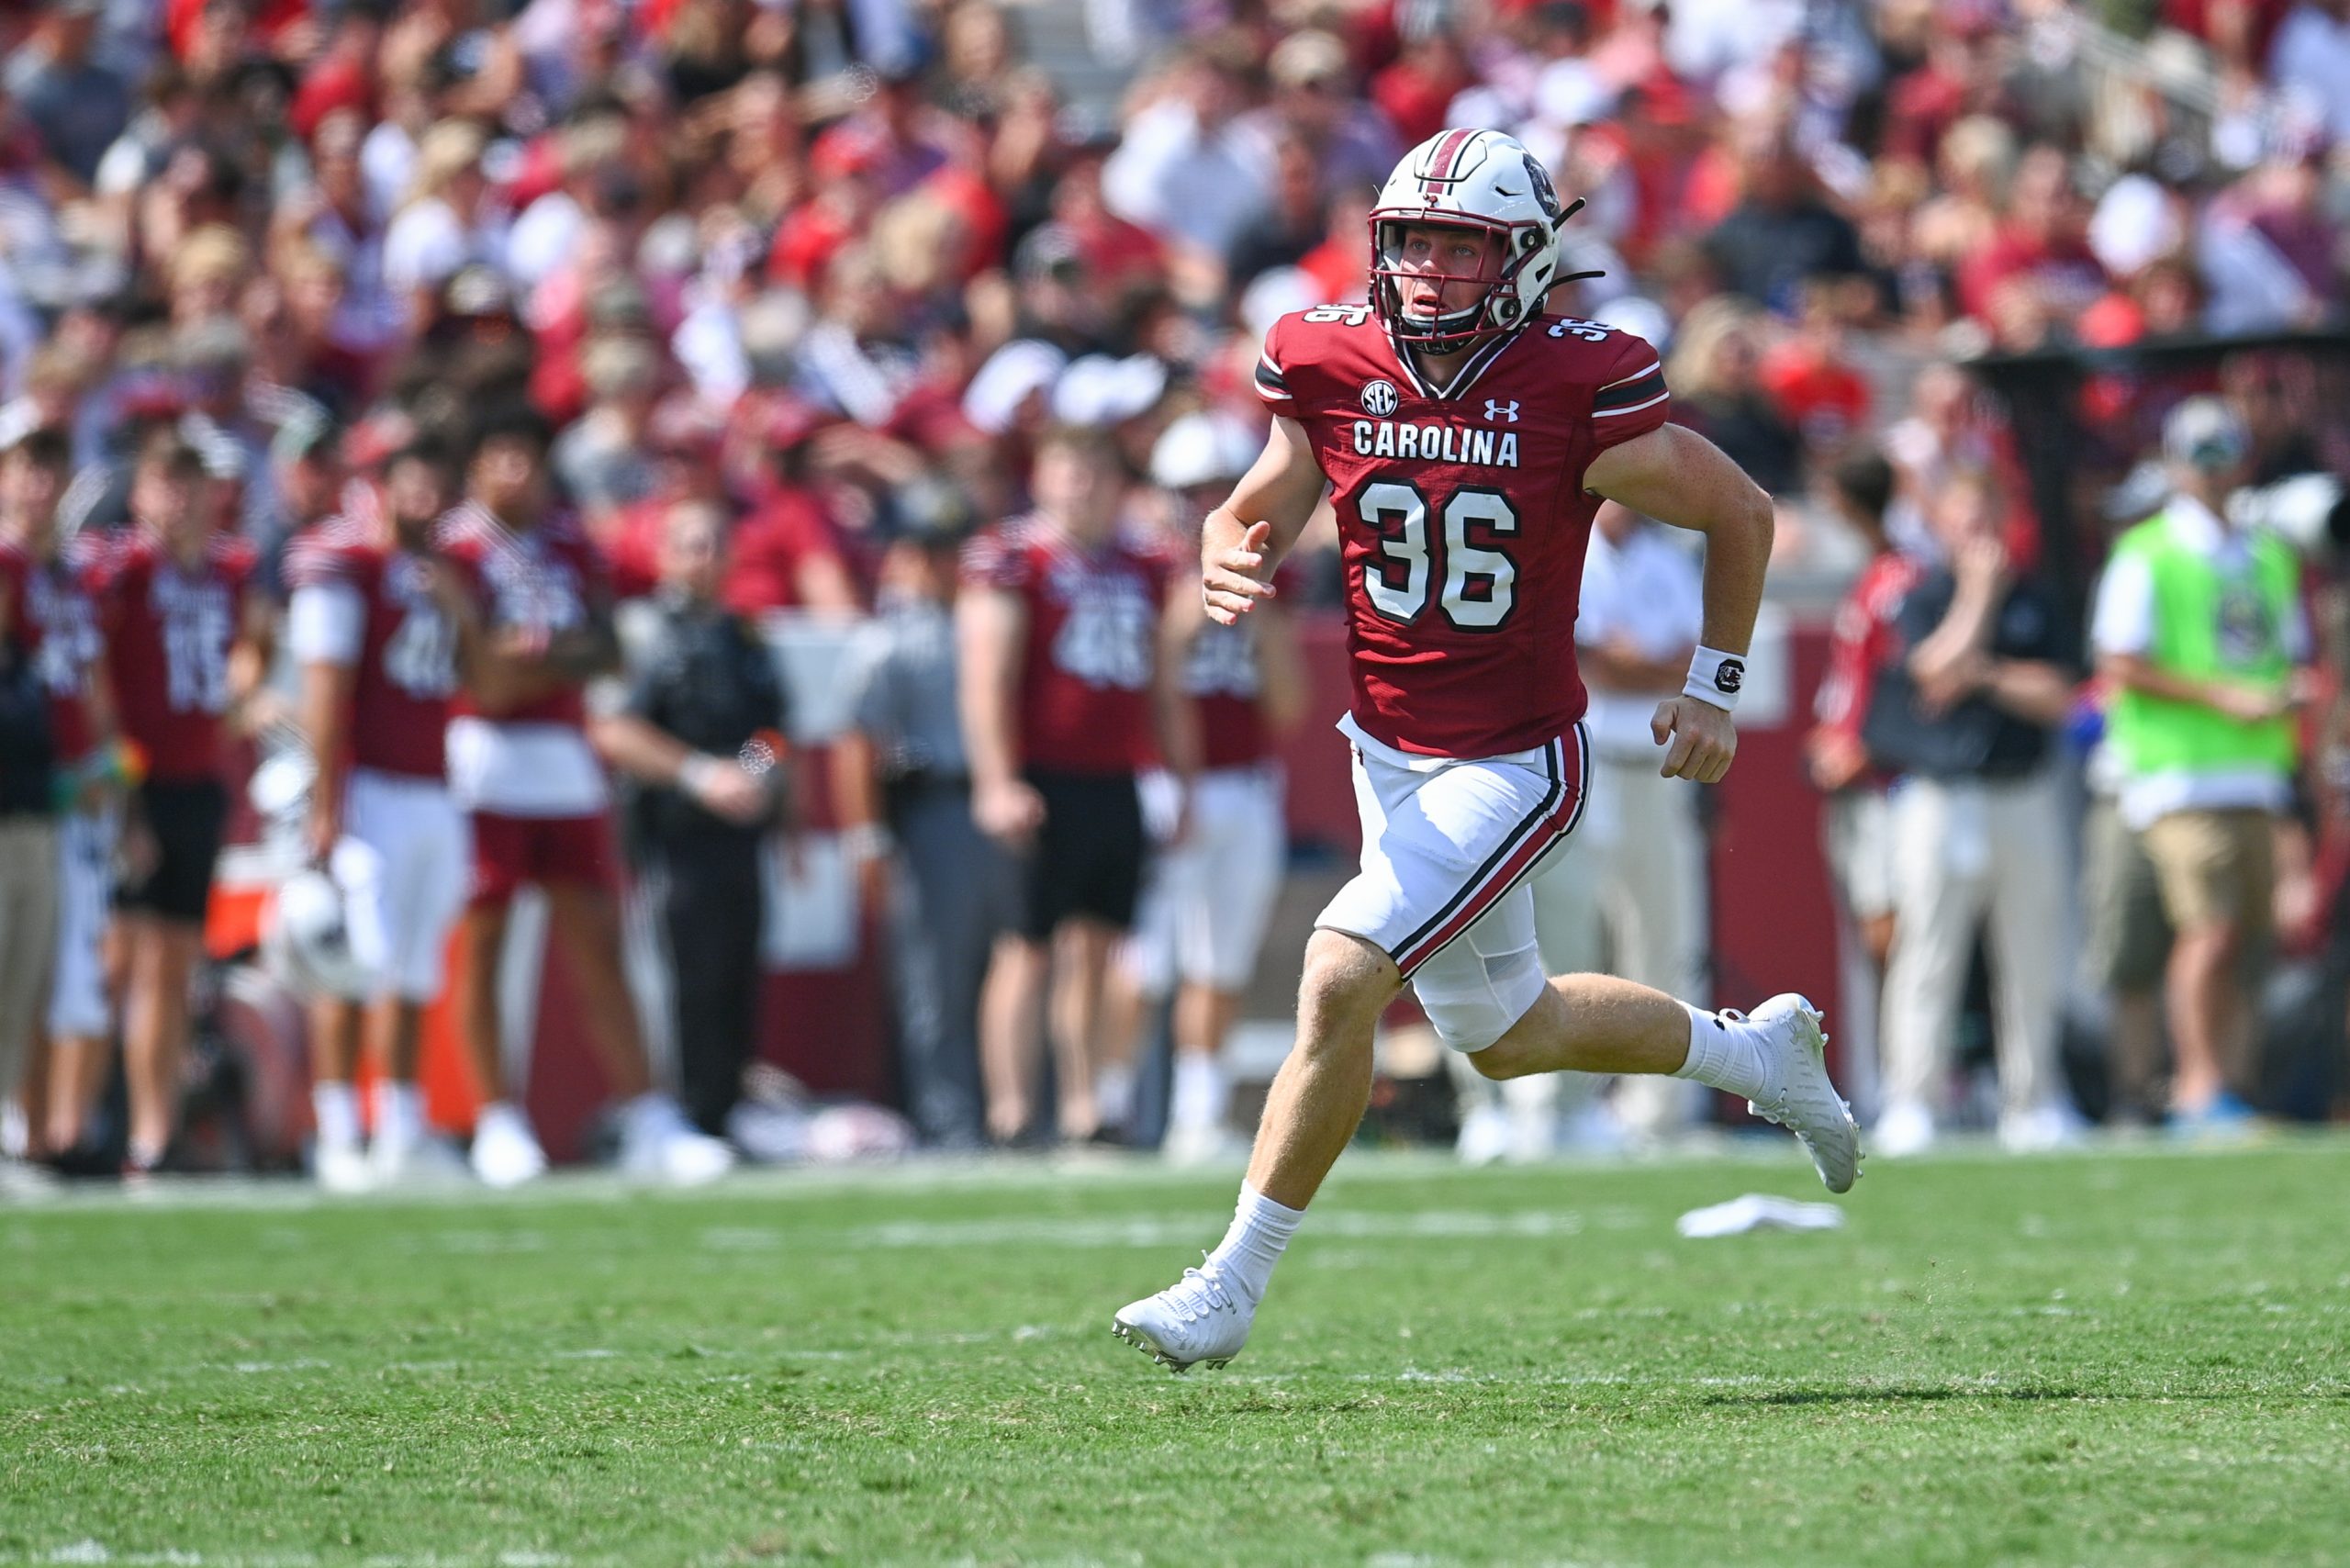 Hunter Rogers, a former receiver at Spring Valley High School and a redshirt sophomore walk-on, handles deep snapping duties for the Gamecocks. Photography courtesy of Tim Cowie